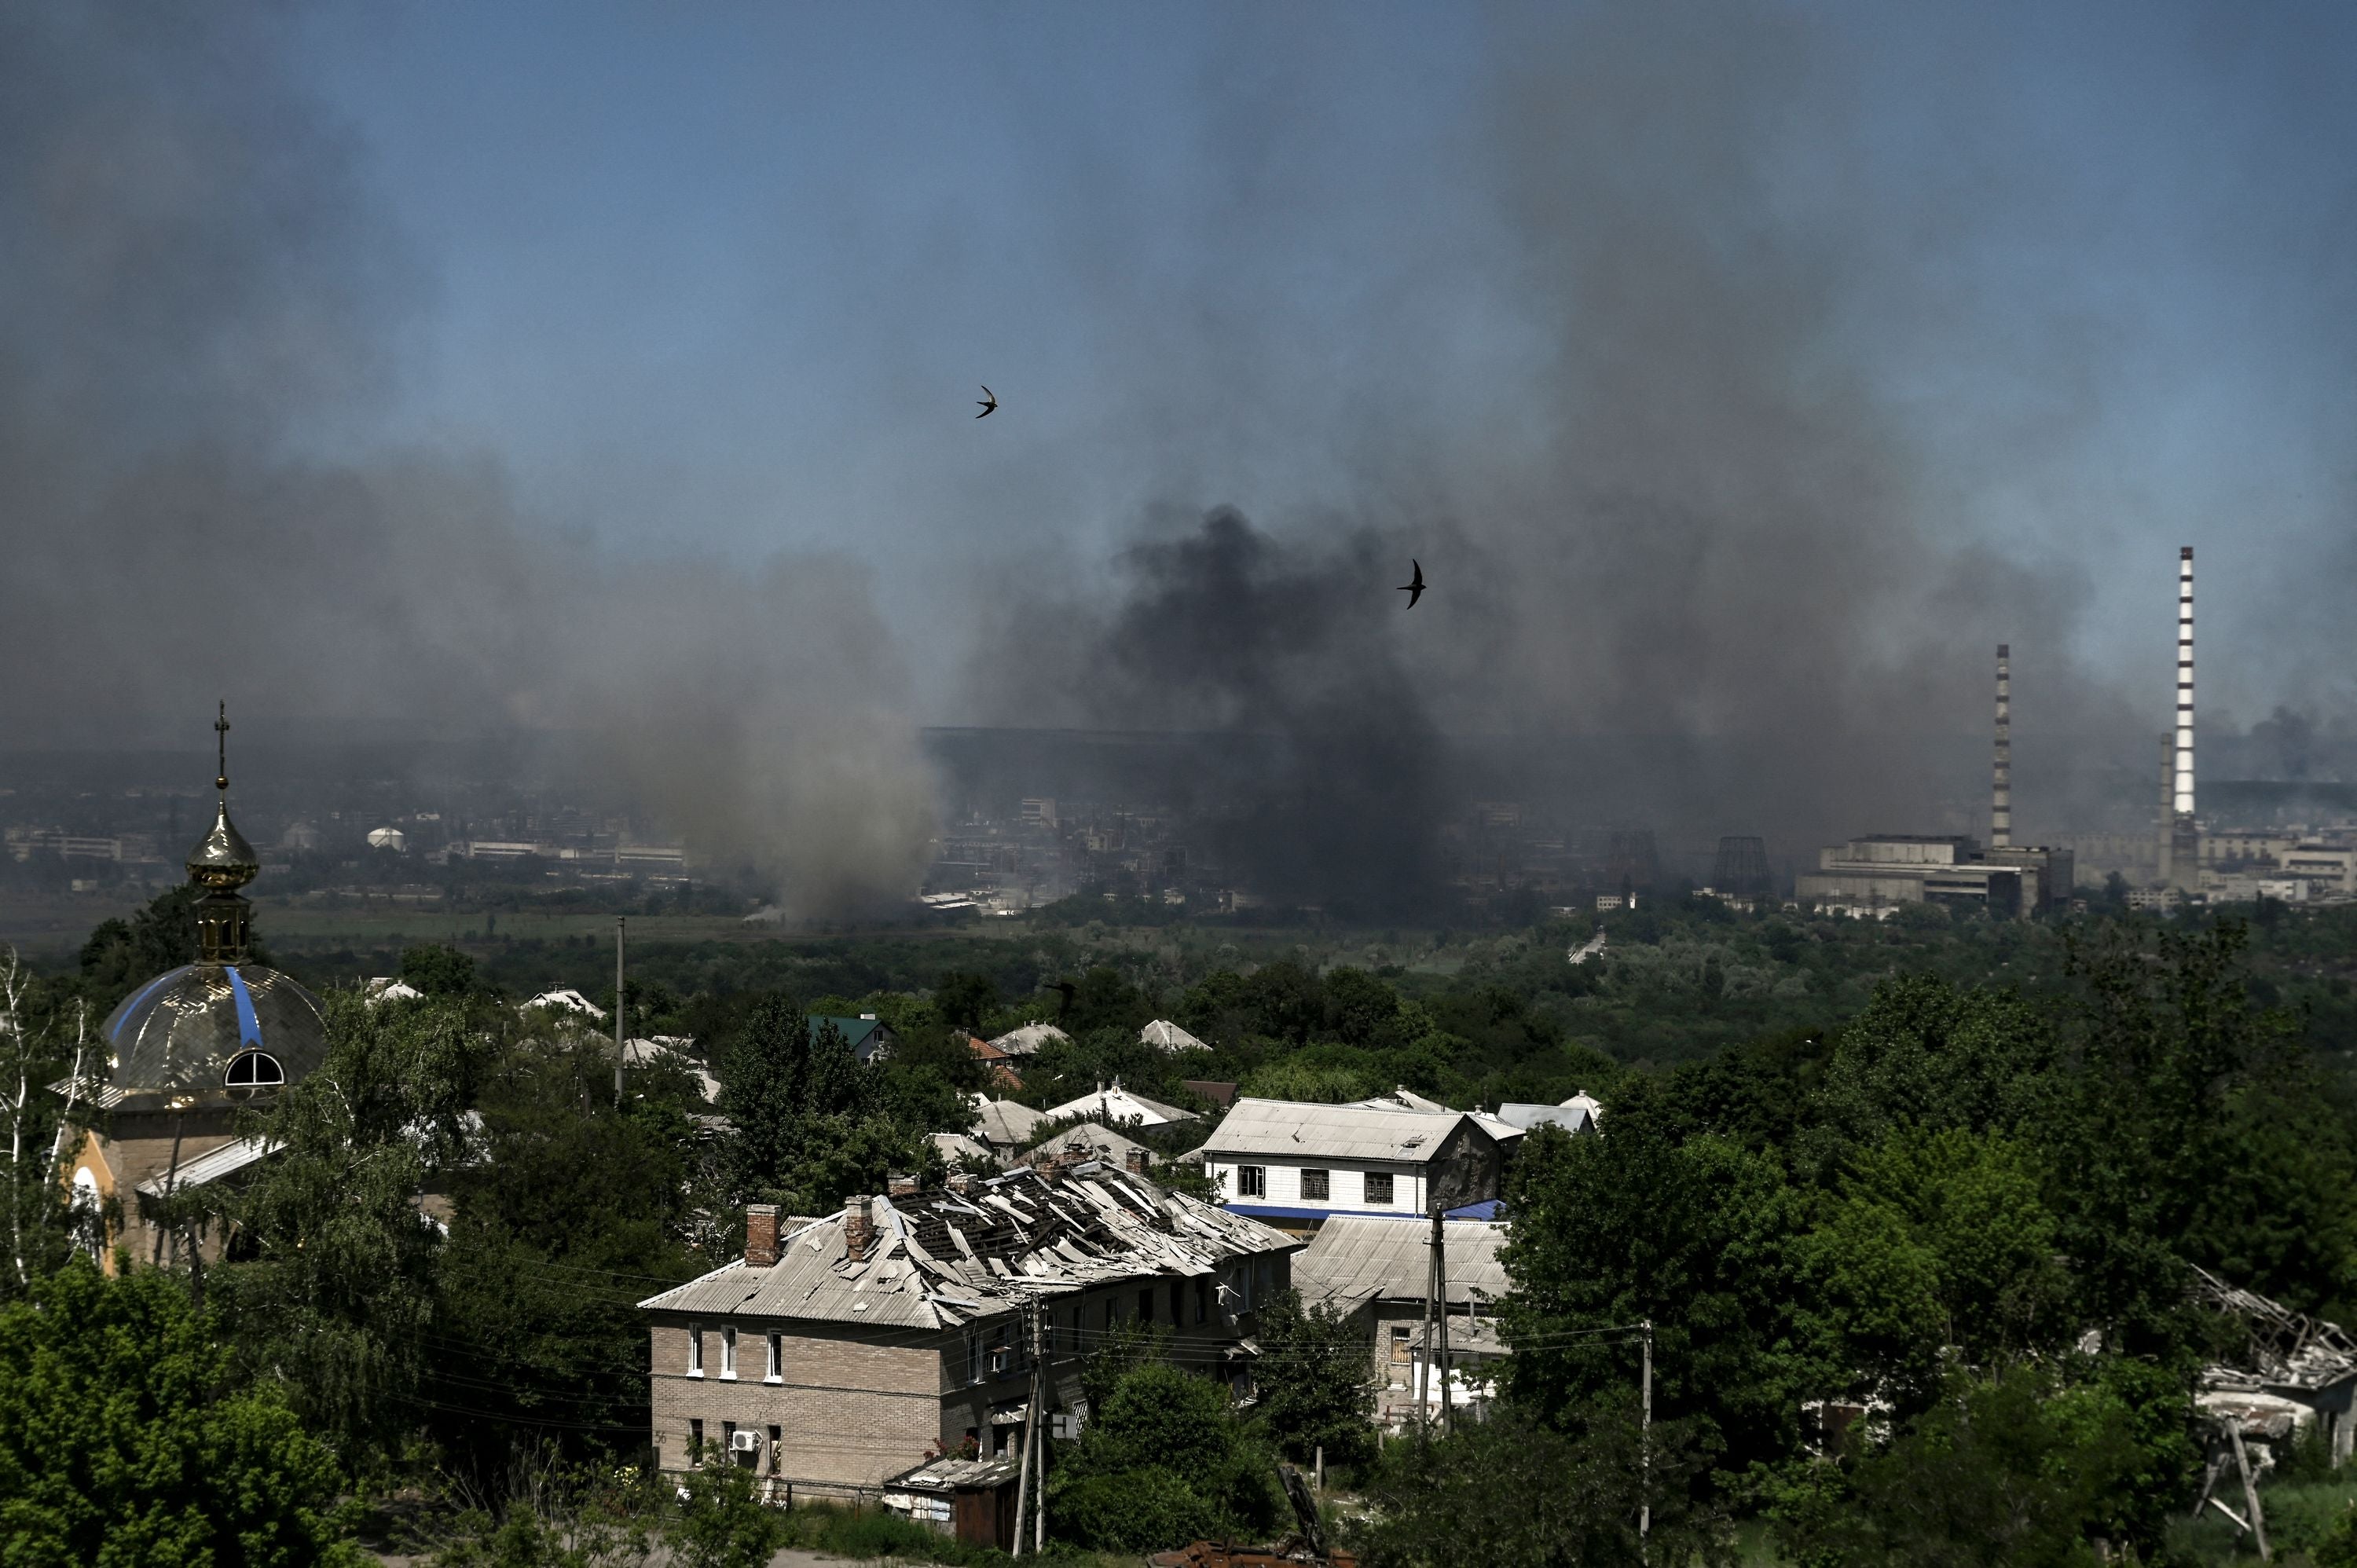 Black smoke and dirt rise from Severodonetsk during a battle between Russian and Ukrainian troops, while a damaged building is pictured in nearby Lysychansk